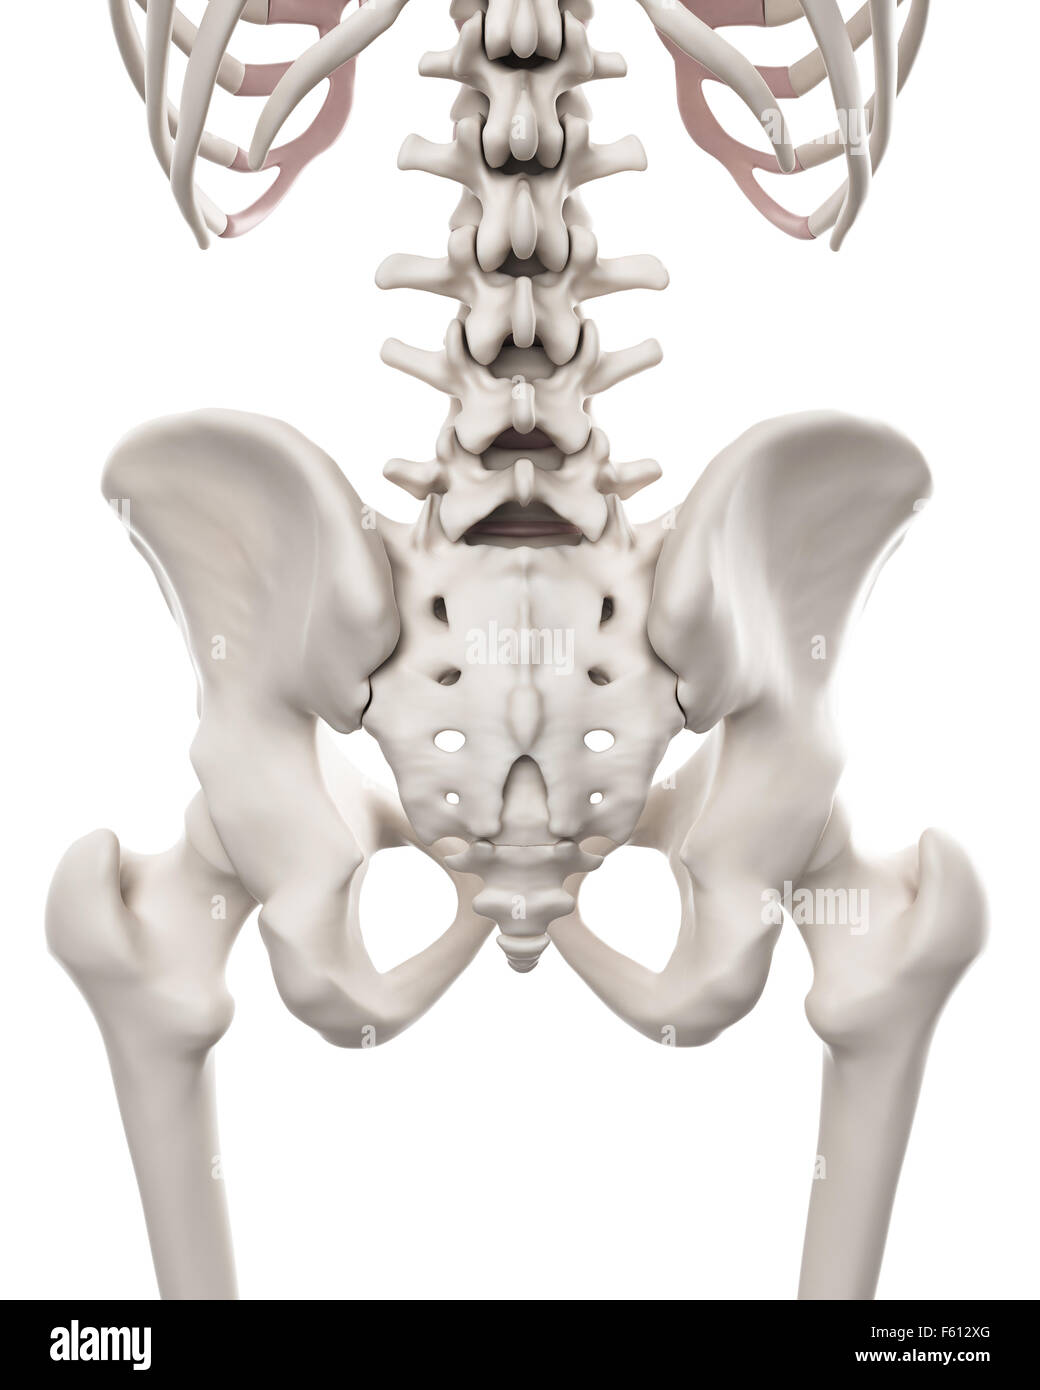 medically accurate illustration of the skeletal system - the hip and lower spine Stock Photo